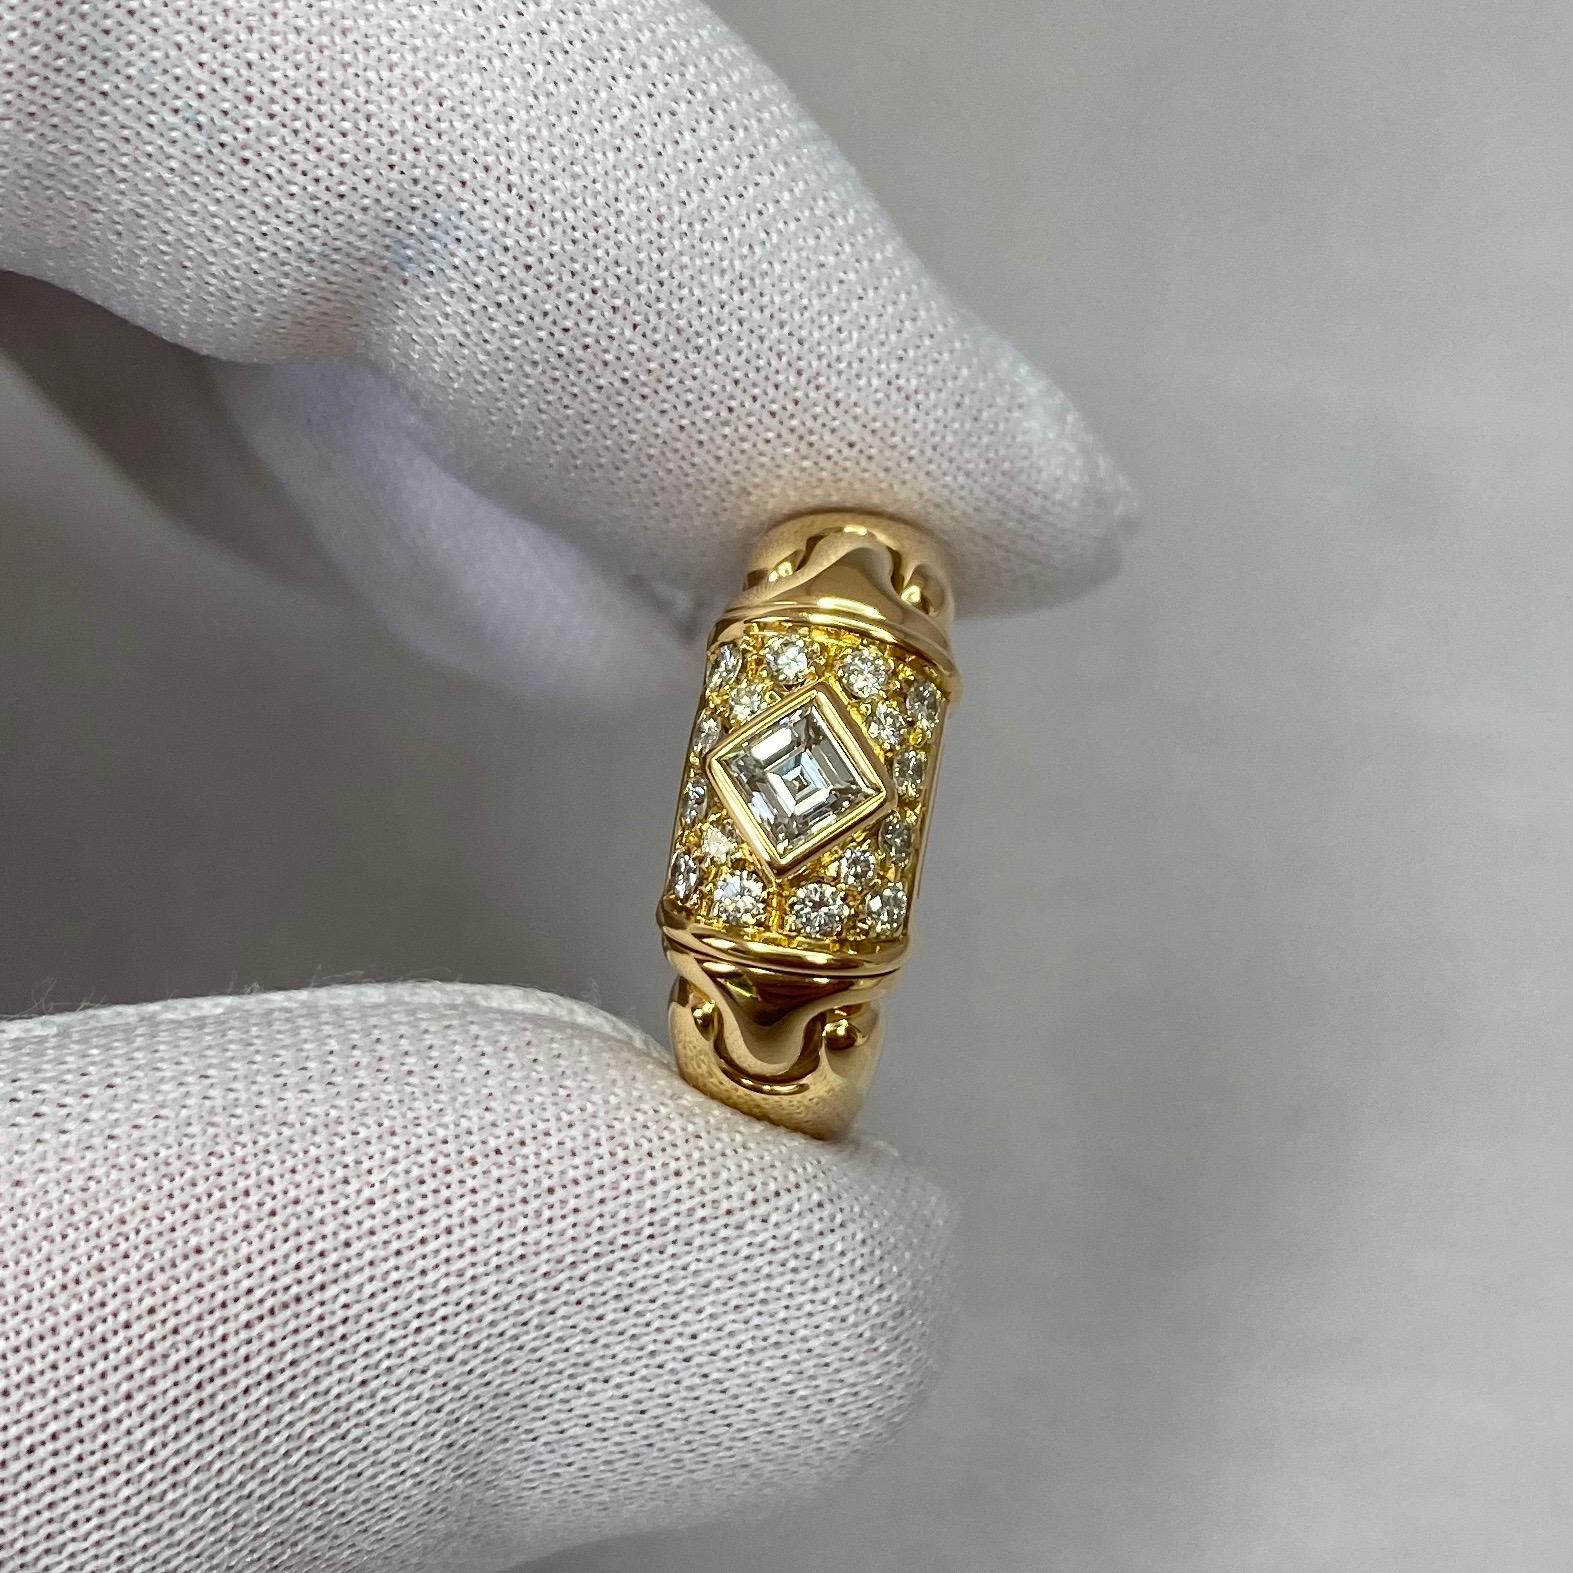 A classic Bvlgari Diamond Ring from the vintage Parentesi range with a beautiful square cut centre diamond surrounded by round brilliant cut diamonds.
The ring is stamped Bvlgari 750 (18k) Made In Italy with Italian hallmarks and Bvlgari serial